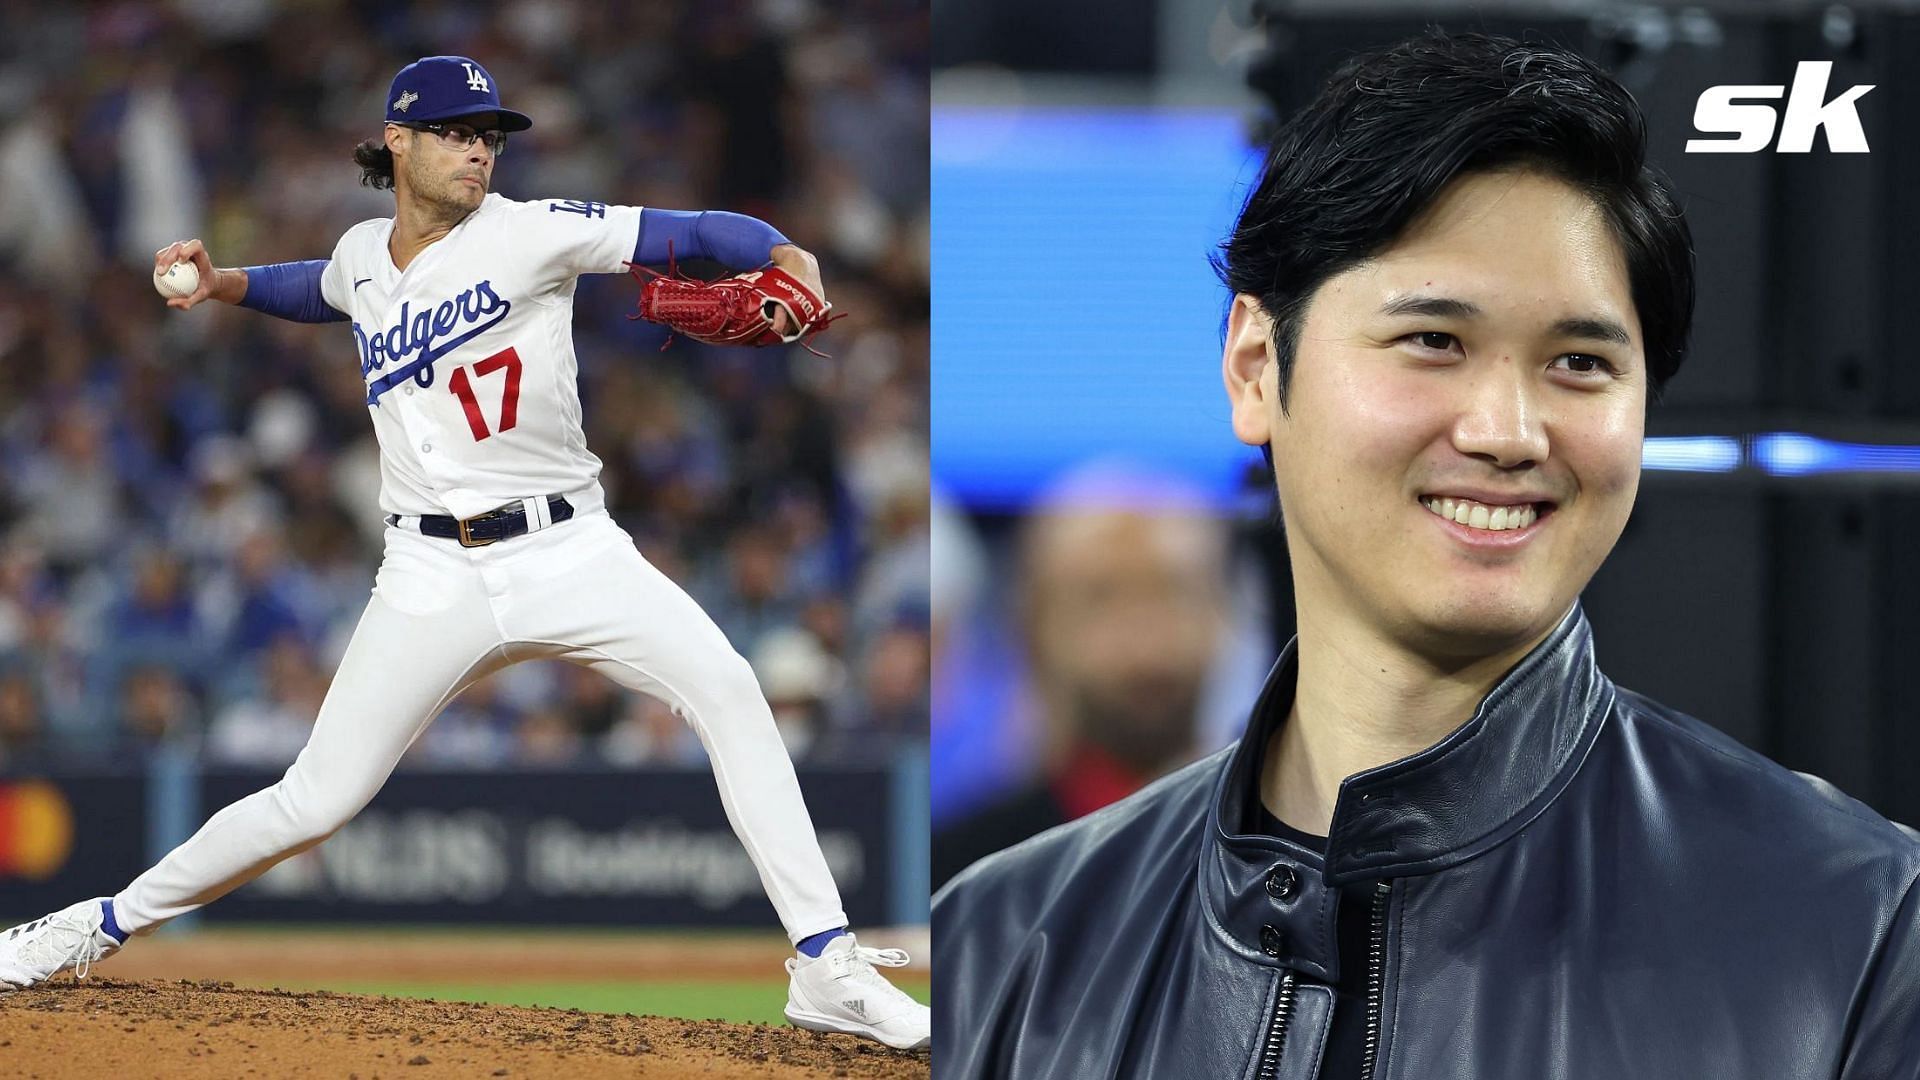 Joe Kelly was seen at a Jack in the Box in a new Porsche that was gifted to his wife by Shohei Ohtani